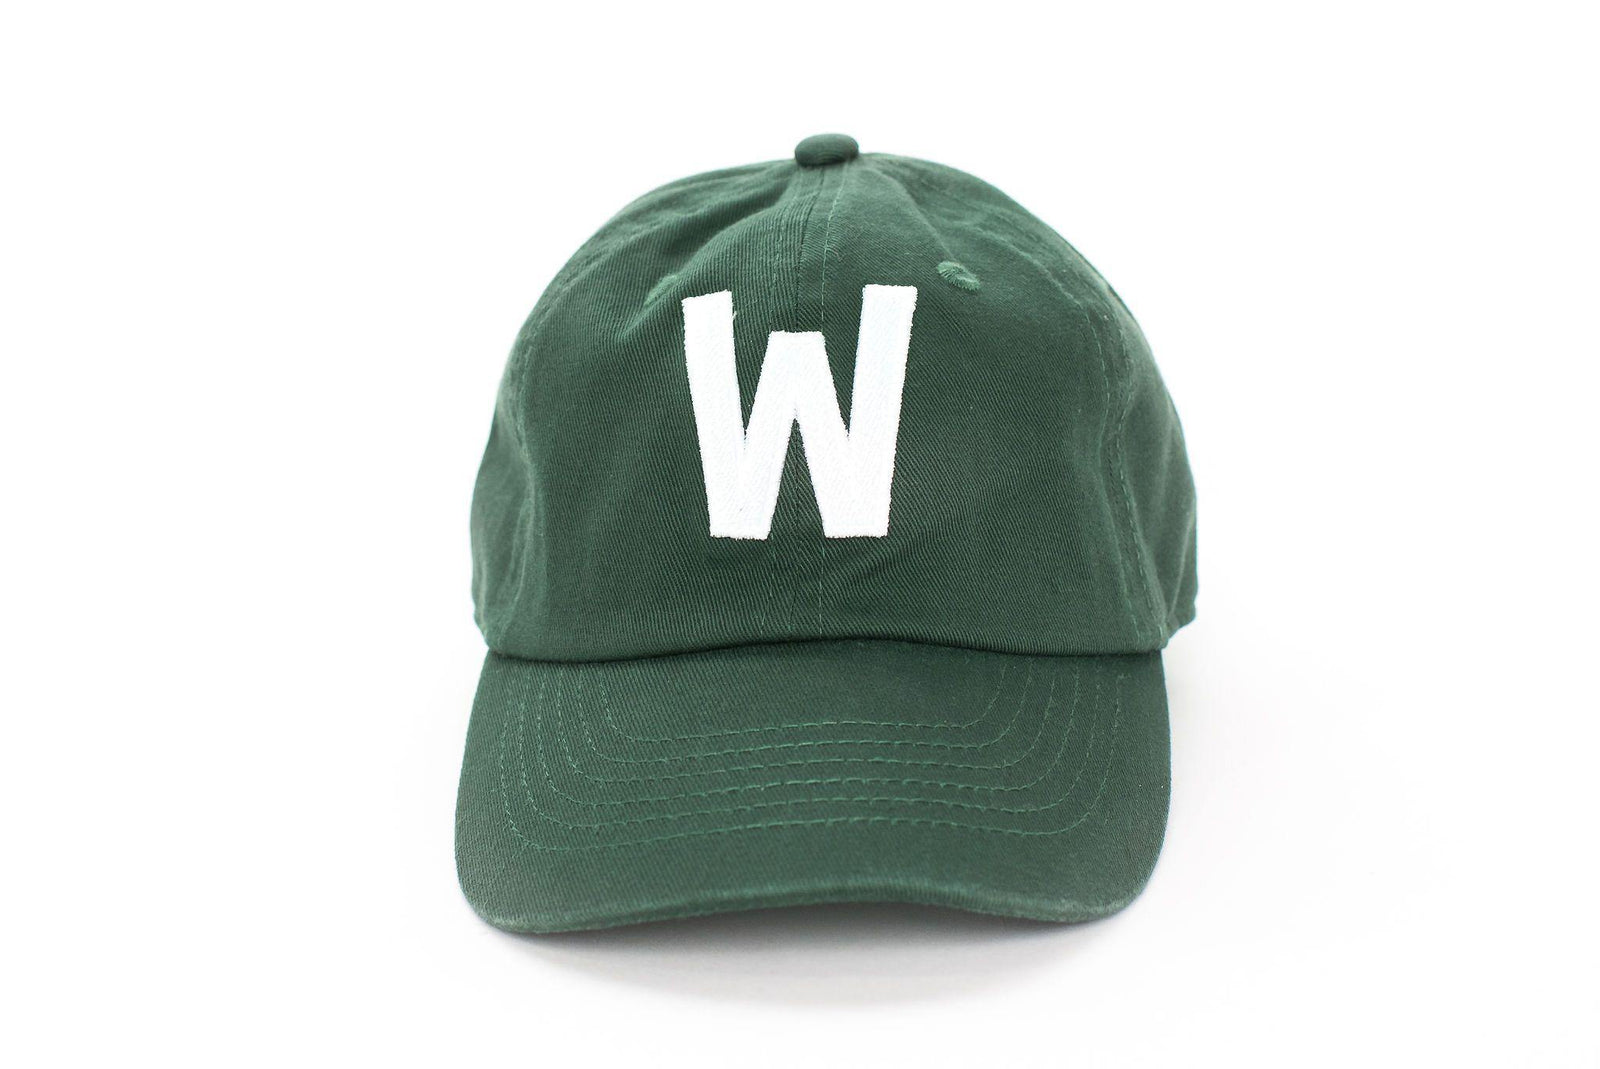 Buy Personalized Baseball Hats for Men